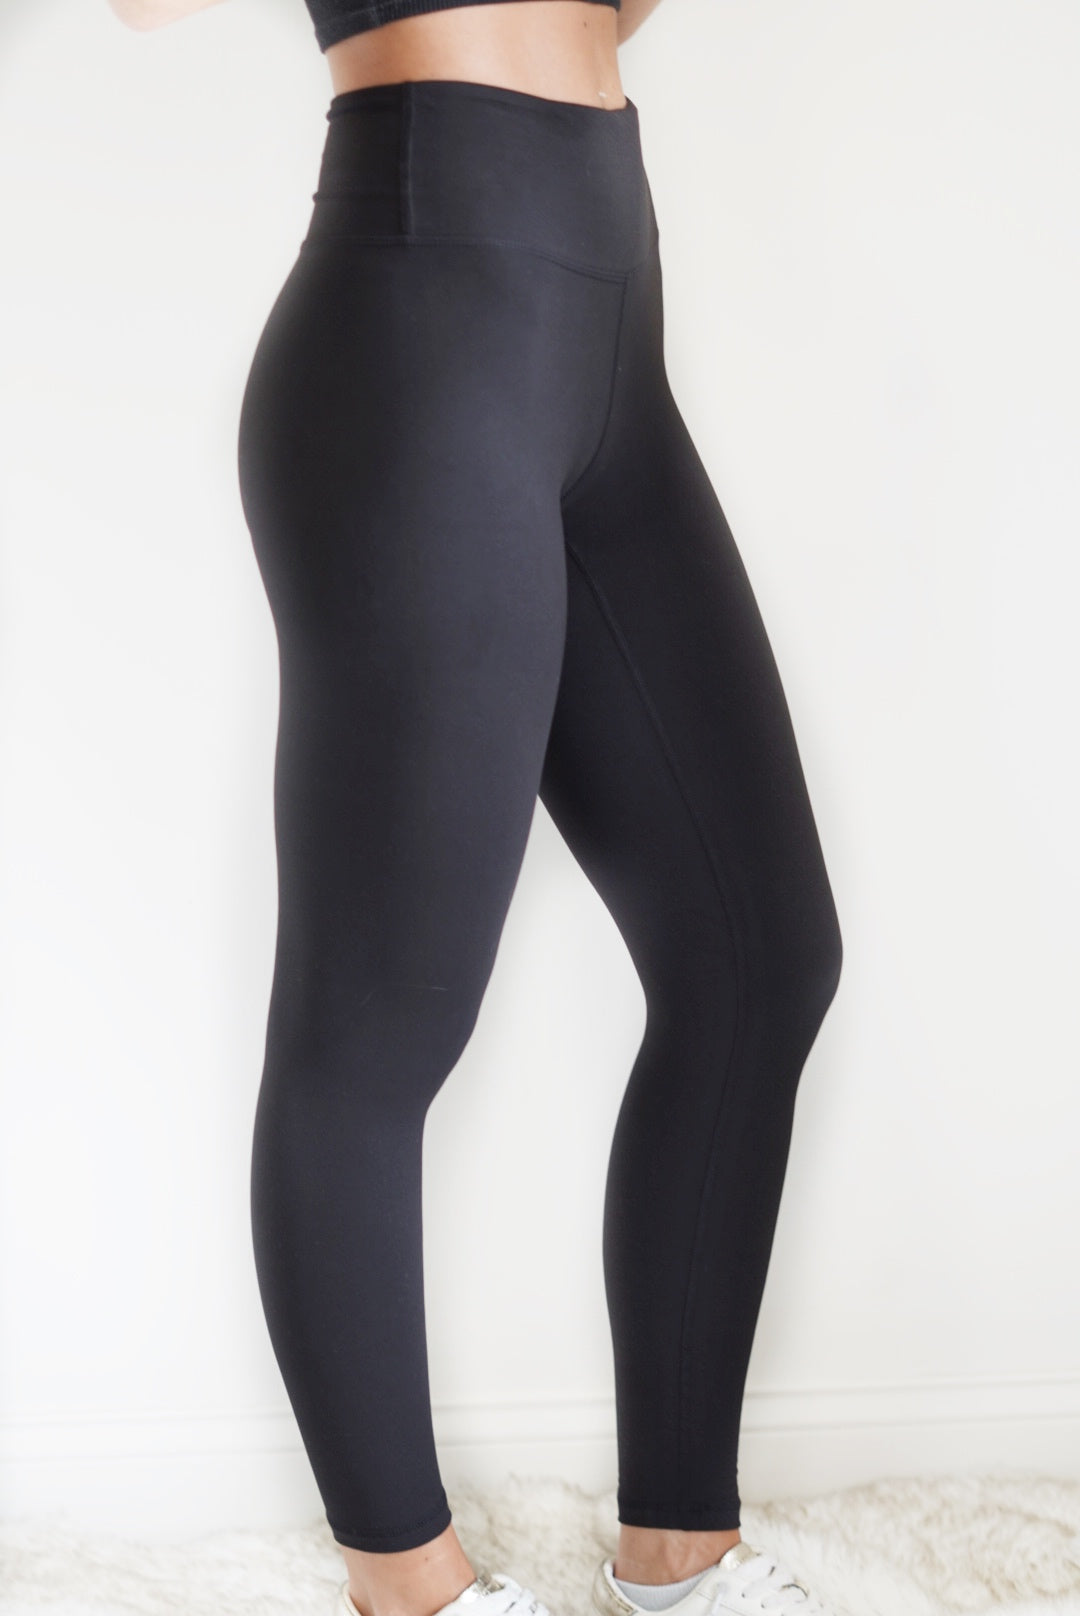 These Hayley High Waisted Yoga leggings are such an essential to have for everyday wear! Whether you are going to the gym or running errands, these leggings are perfect for either of those occasions!   Hayley High Waisted Yoga Leggings High Waisted Full Length Butter Soft material Color/ Black Tight Fit 84% Poly Micro Fiber, 16% Spandex Wash With Other Girls Model is wearing size: Small